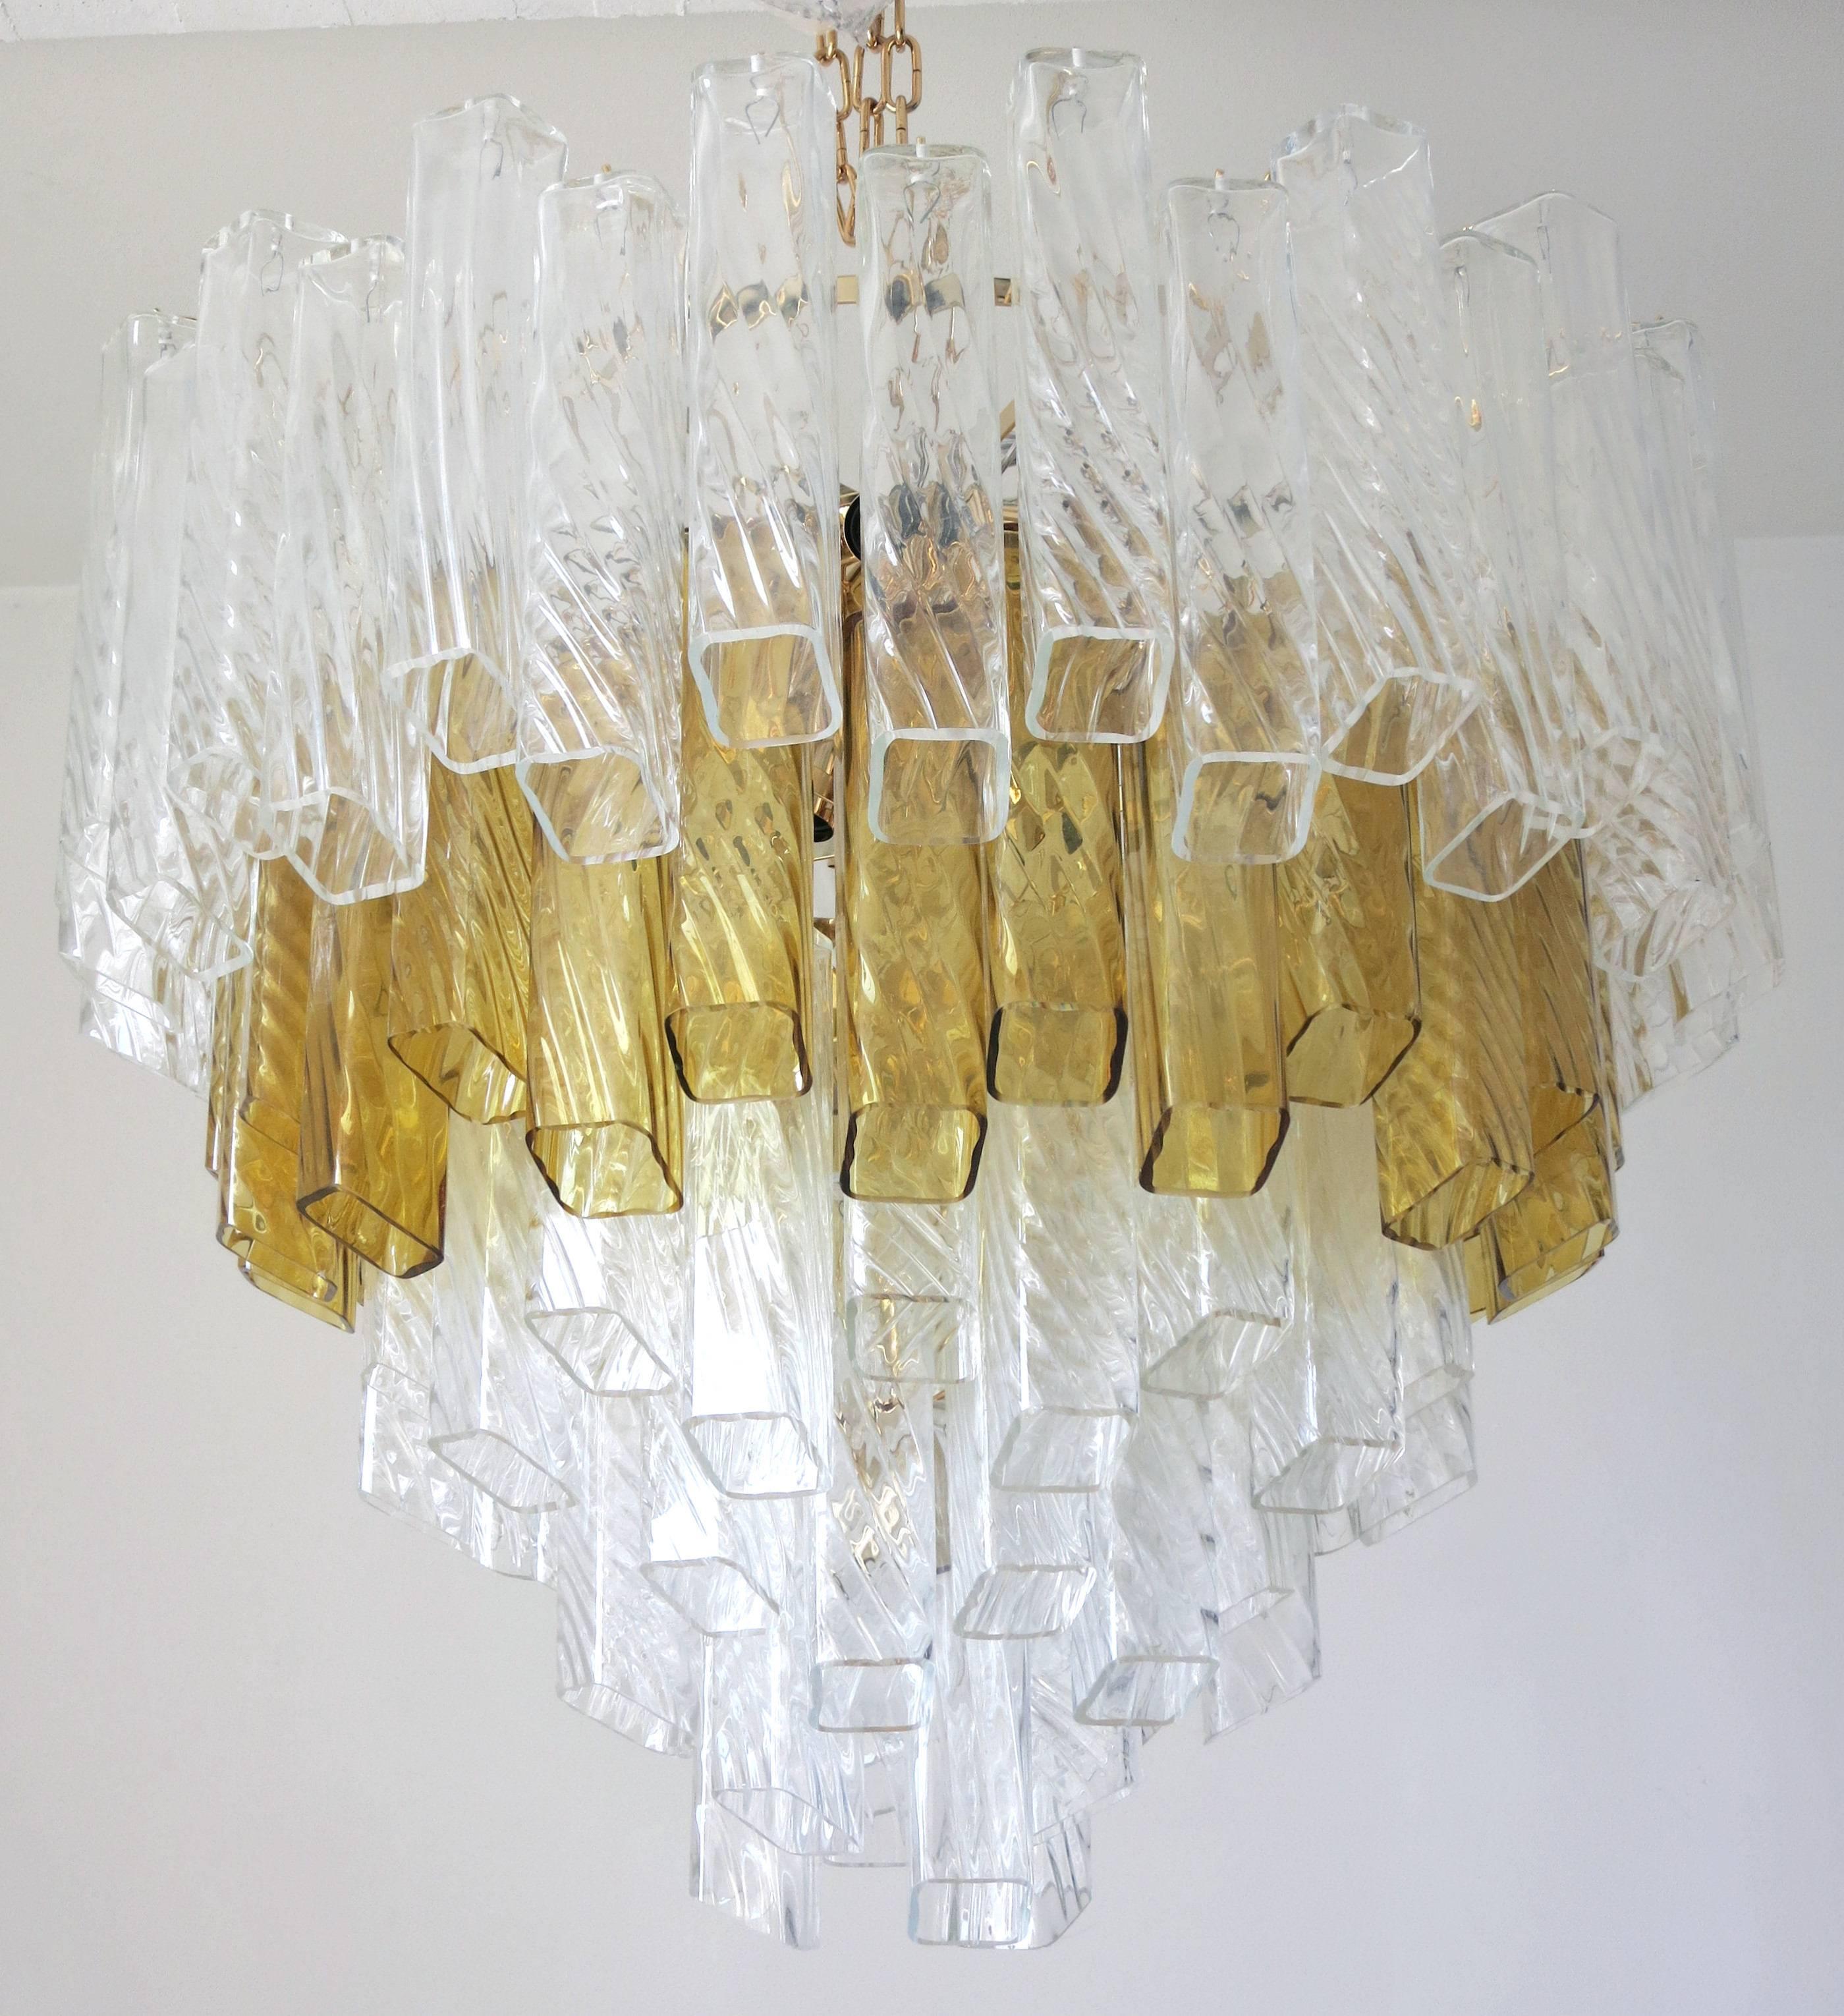 Italian Murano glass chandelier.
Vintage clear and amber handblown Murano glass pieces, on a newly made 24-karat gold-plated frame.
19-light sockets.

This item is located in Fabio Ltd warehouse in Italy.
Note: this item ships from Italy.